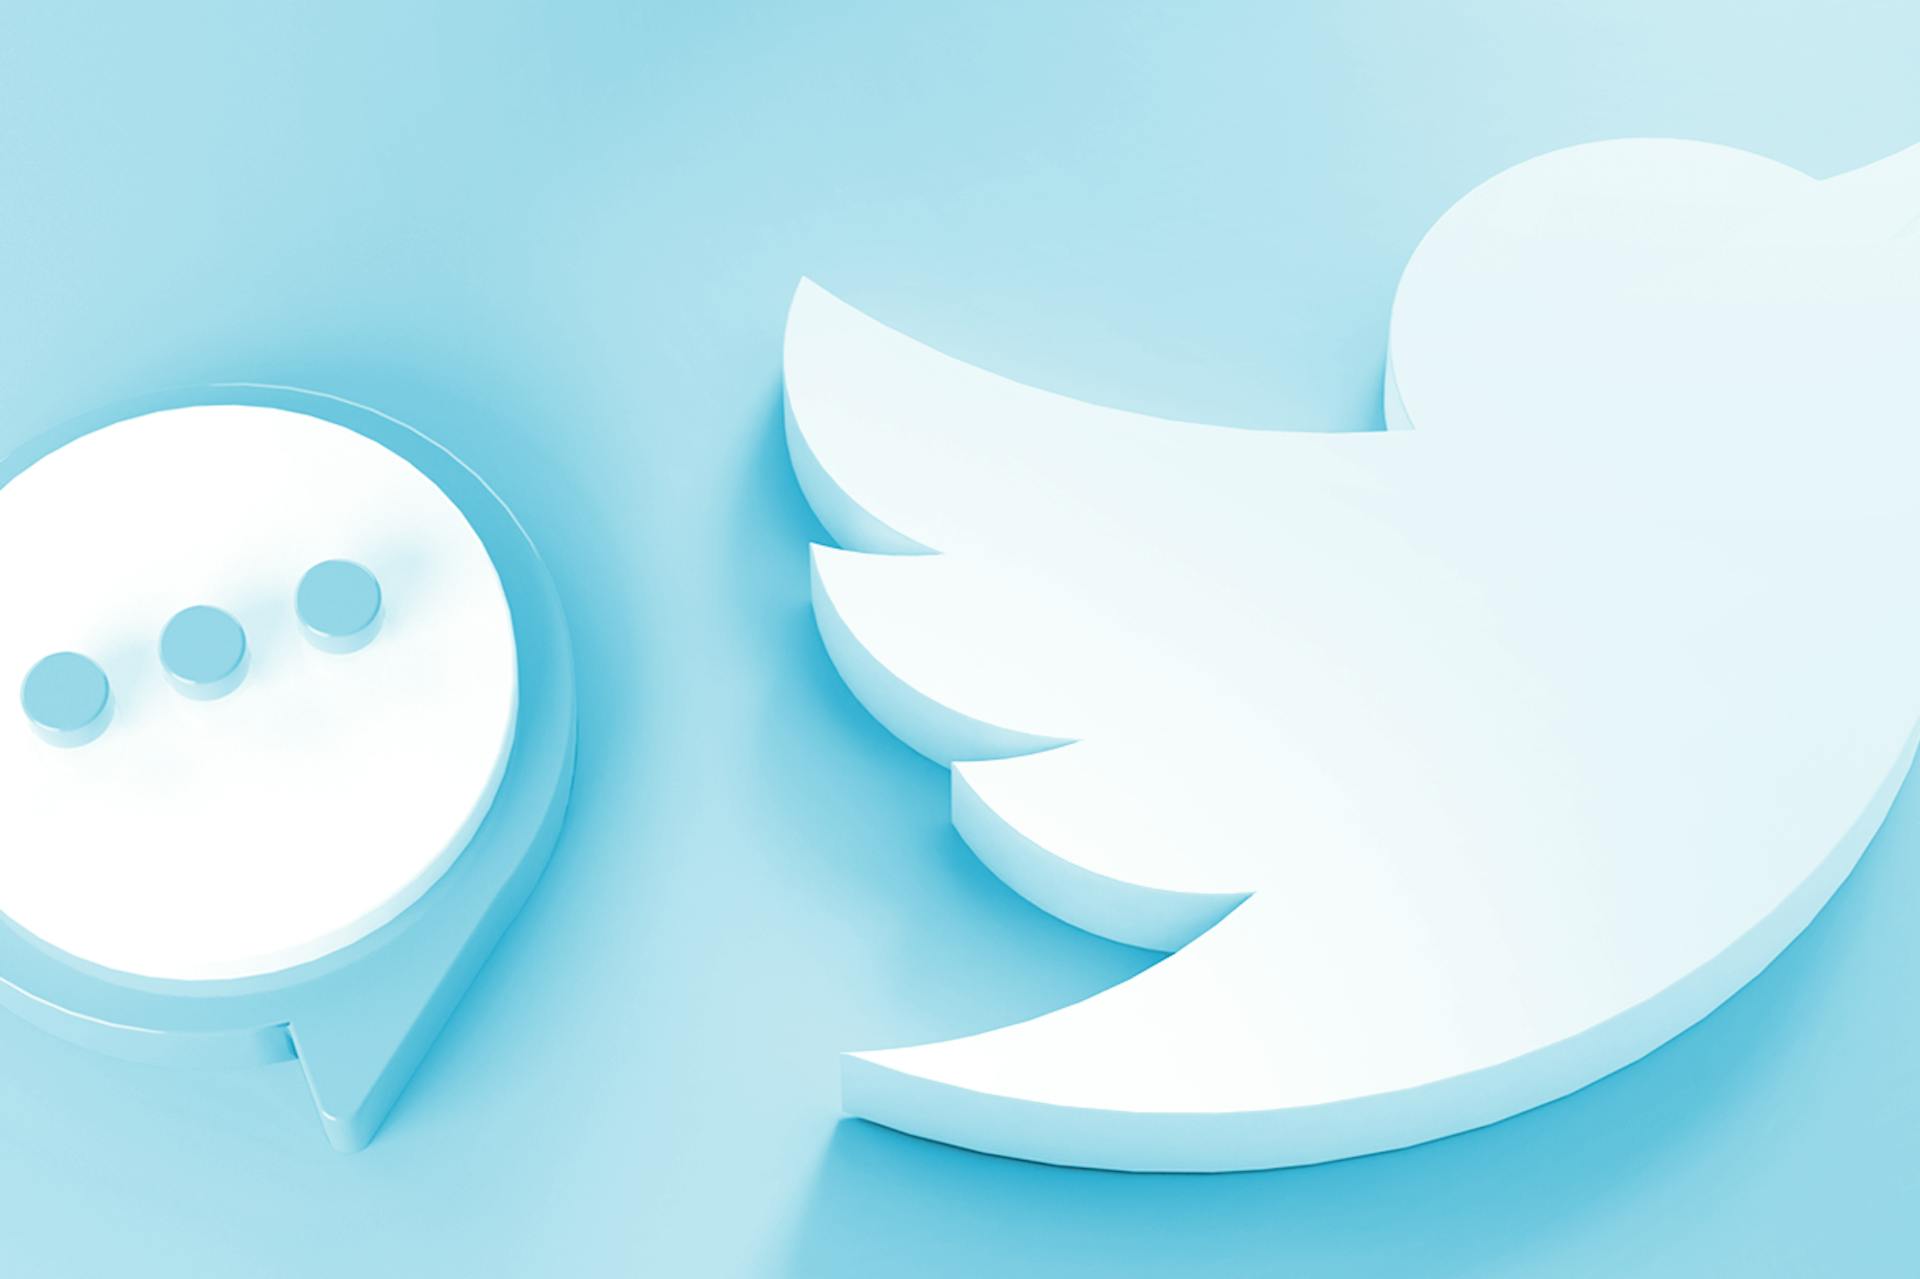 Image of large Twitter logo bird next to a speech bubble. Using Twitter for customer service blog post